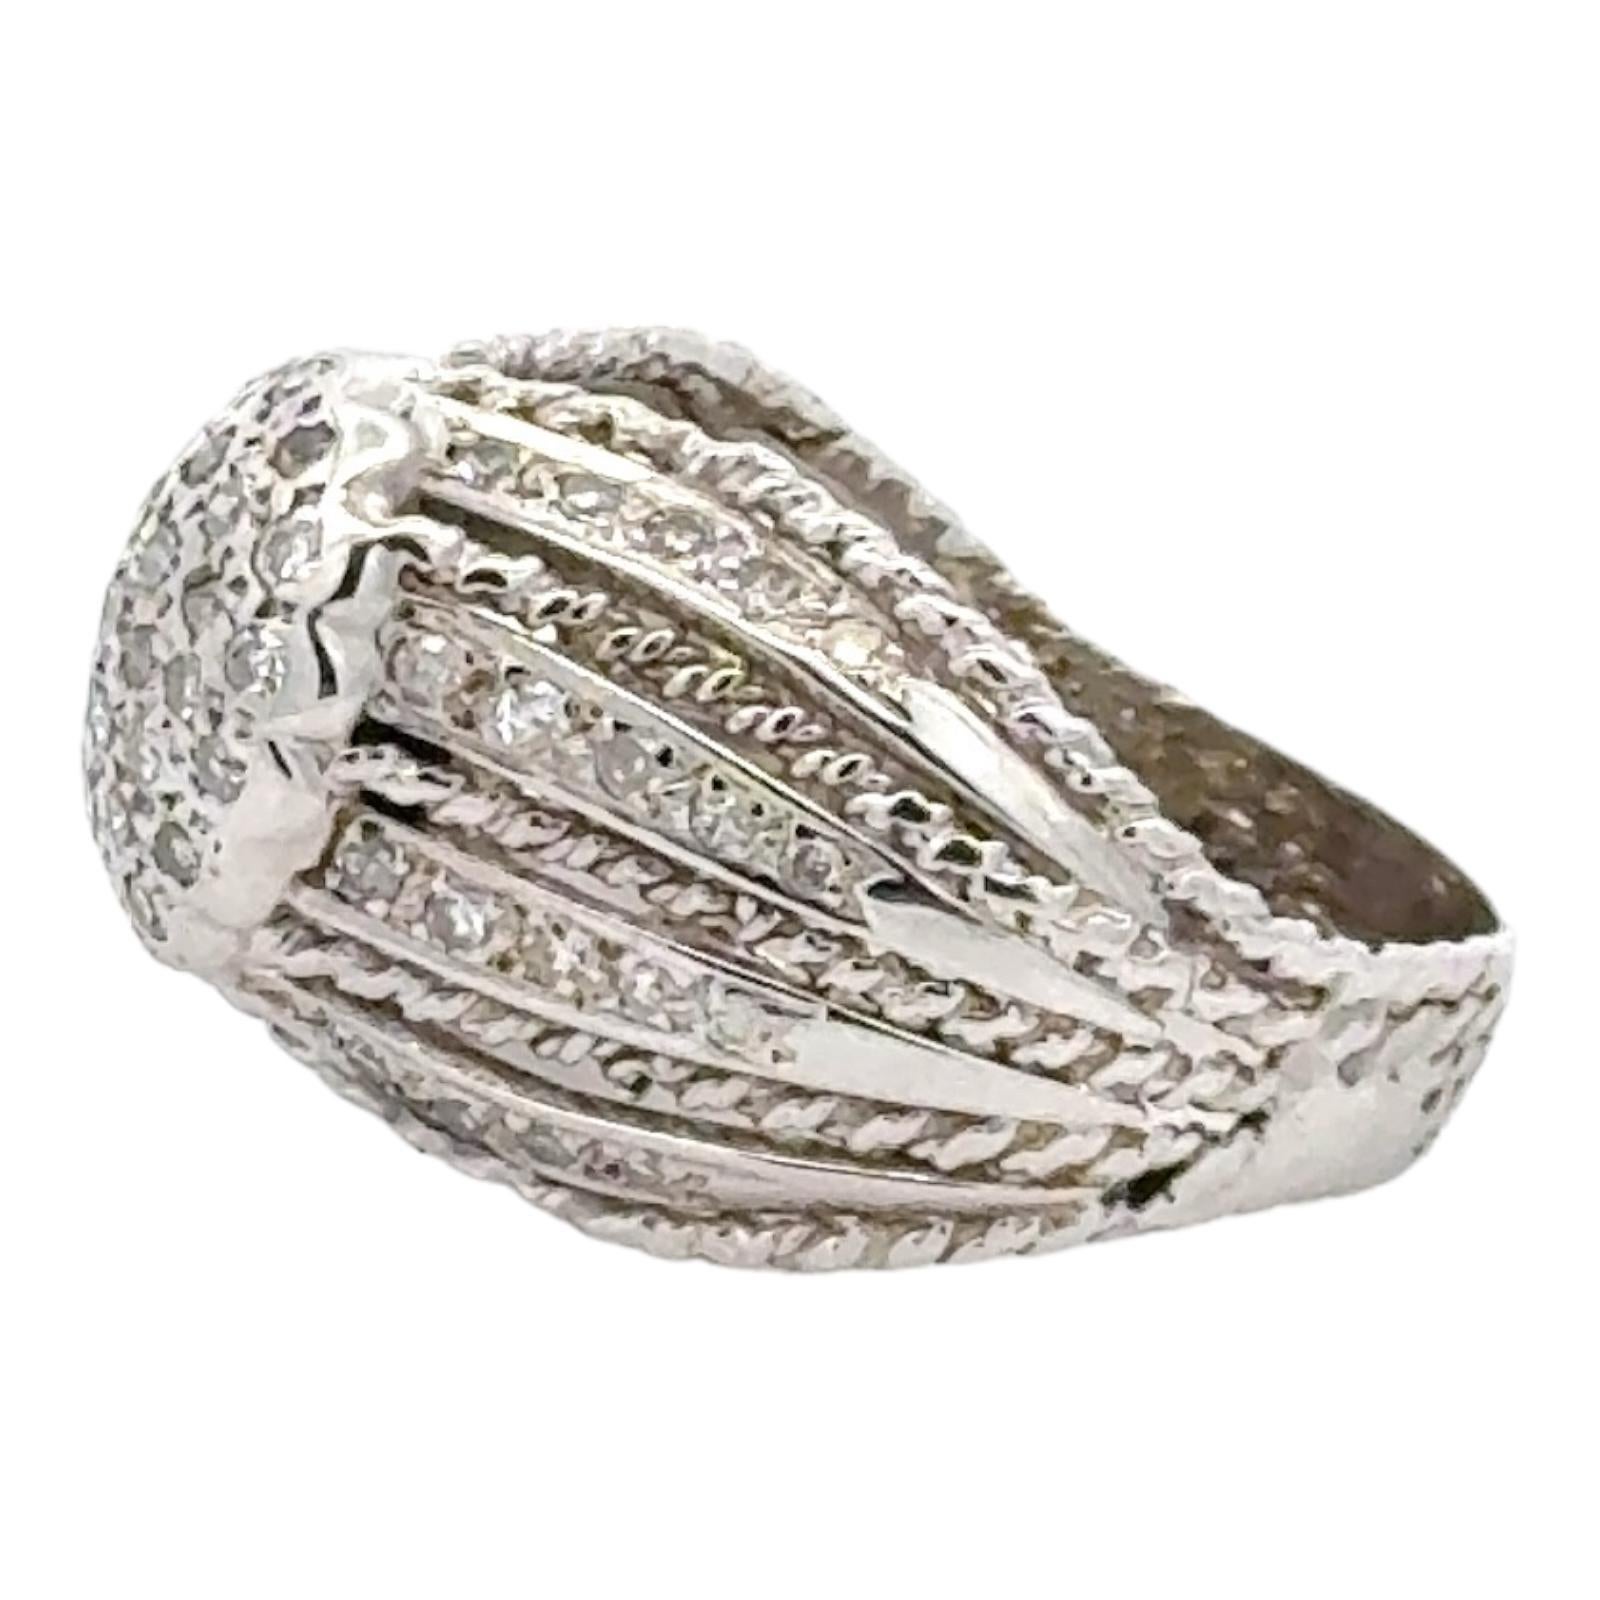 Diamond 14 Karat White Gold Textured Cluster Dome Ring In Excellent Condition For Sale In Boca Raton, FL